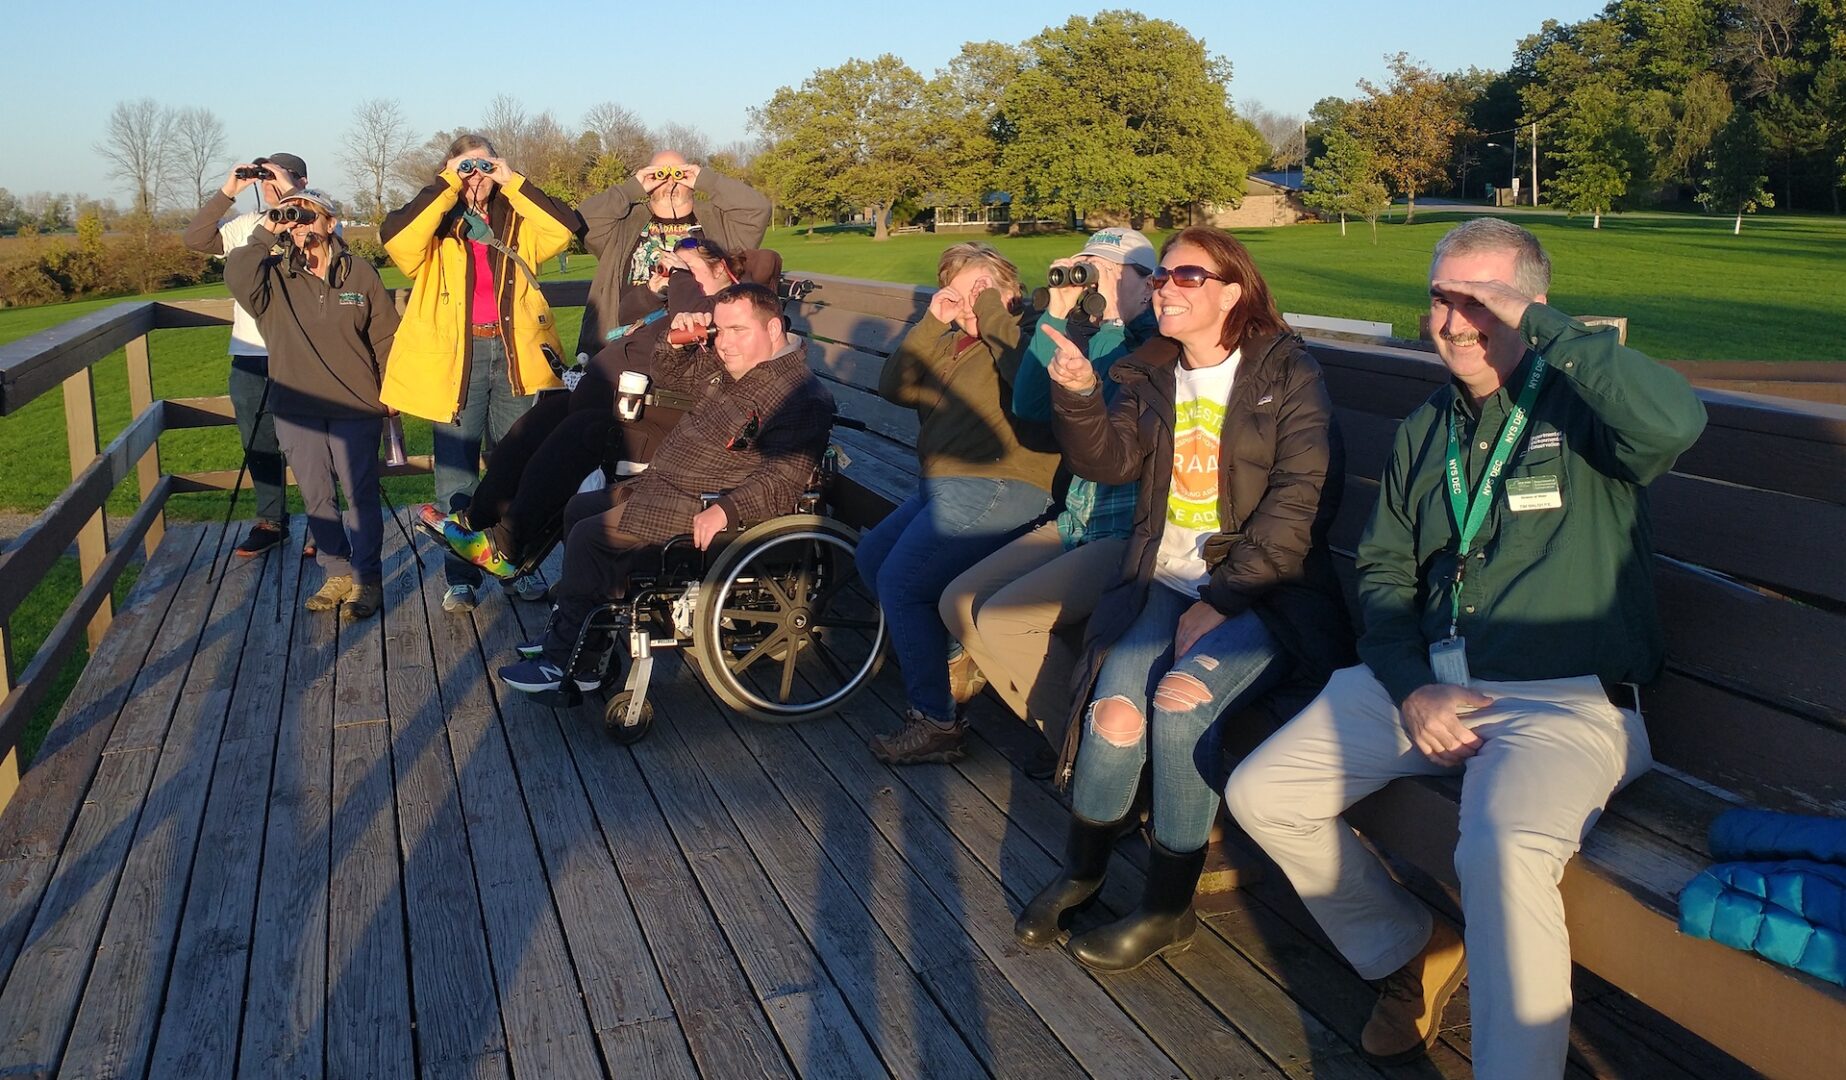 A group of 10 people stands or sits on a raised nature observation deck with grassy expanse around them and trees behind them. Two are in wheelchairs. All are holding binoculars, monoculars or just looking bared-eyed.